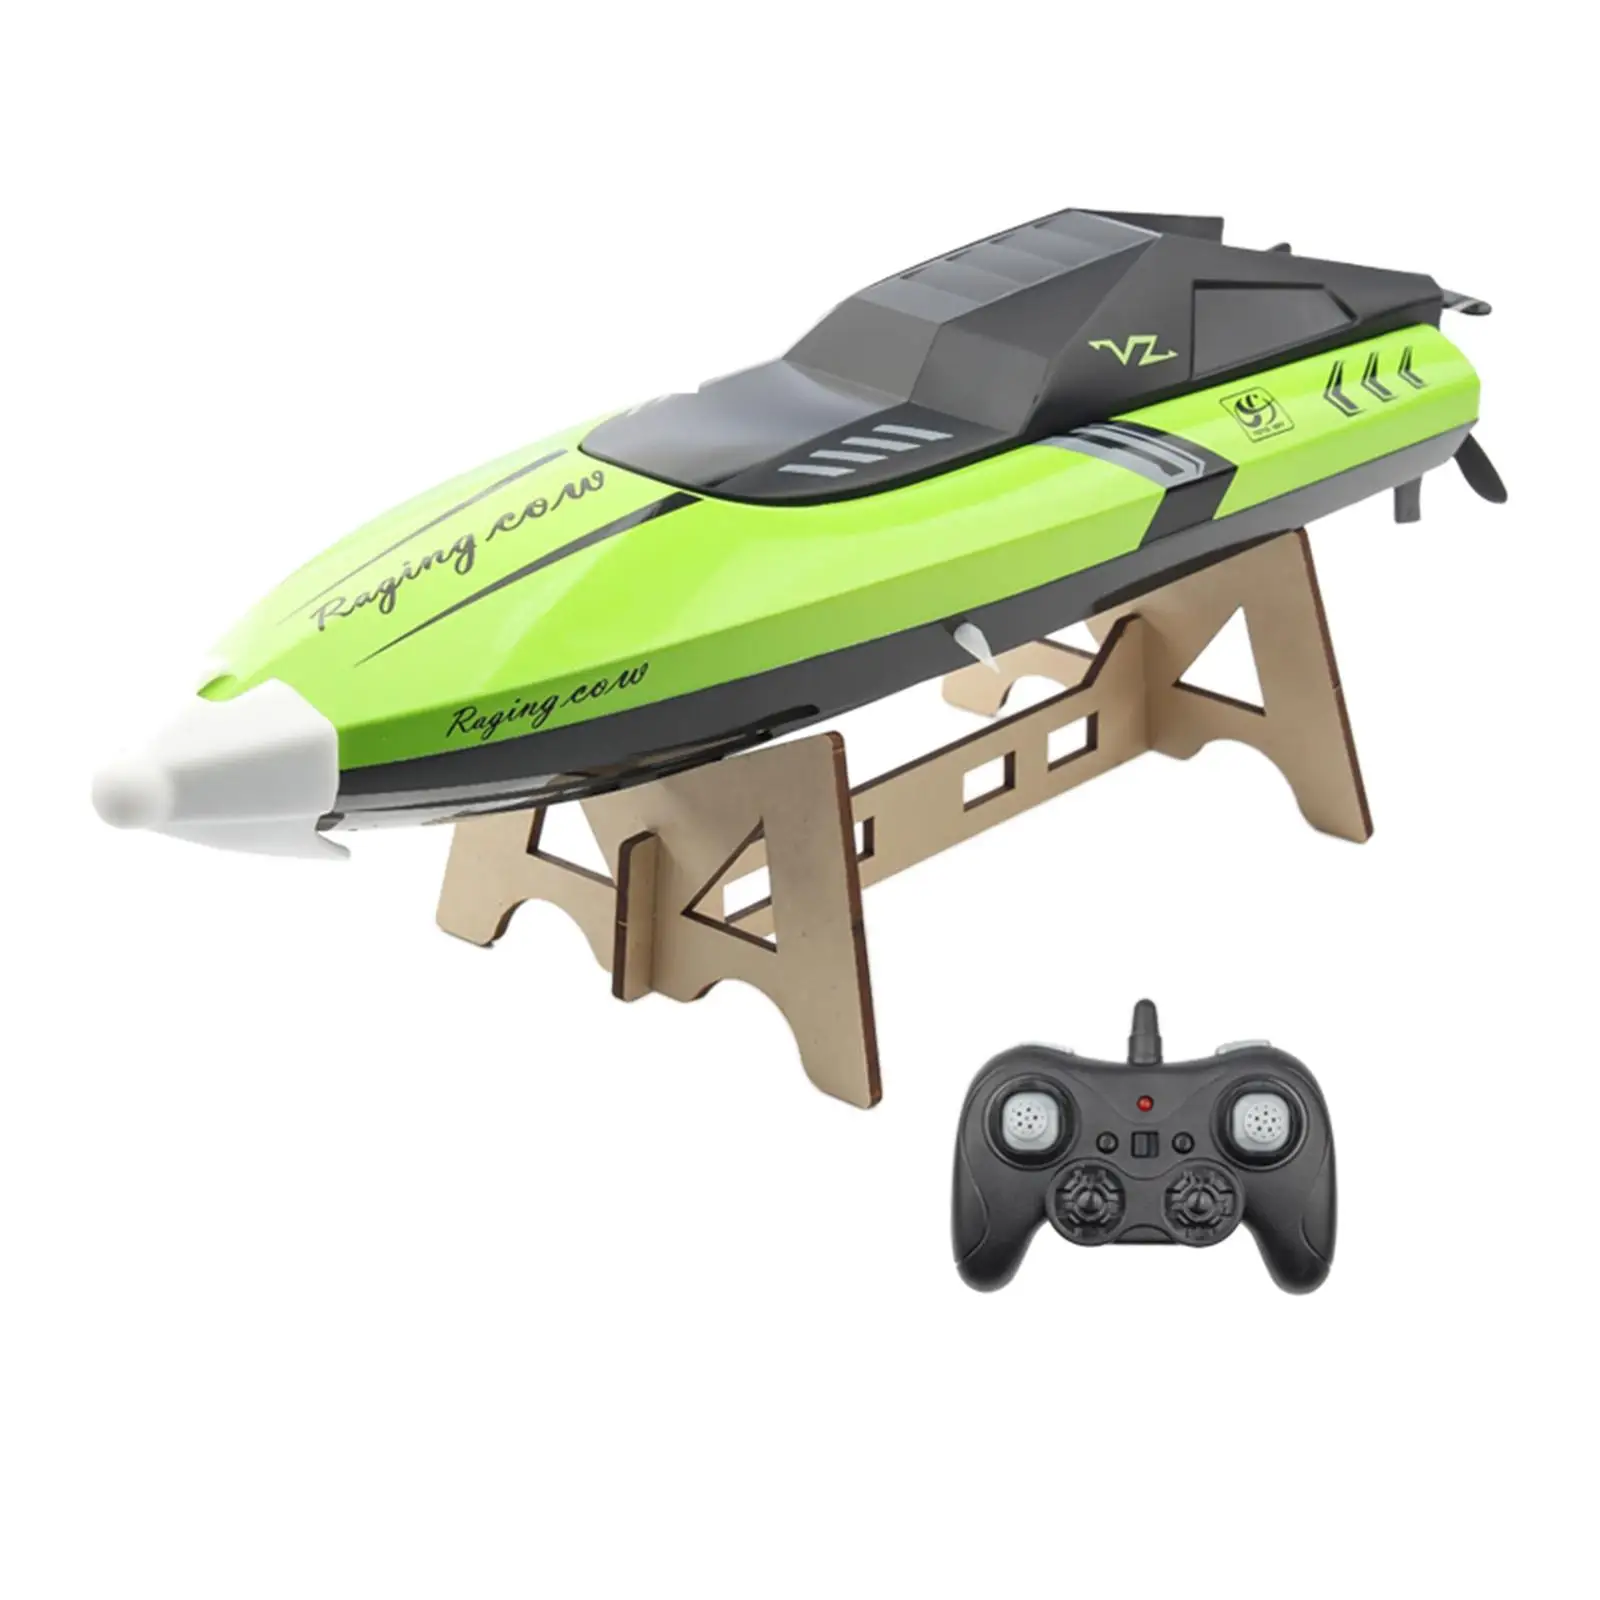 Remote Control Boat Racing Boat High Speed 370motor for Lake Pool Gifts